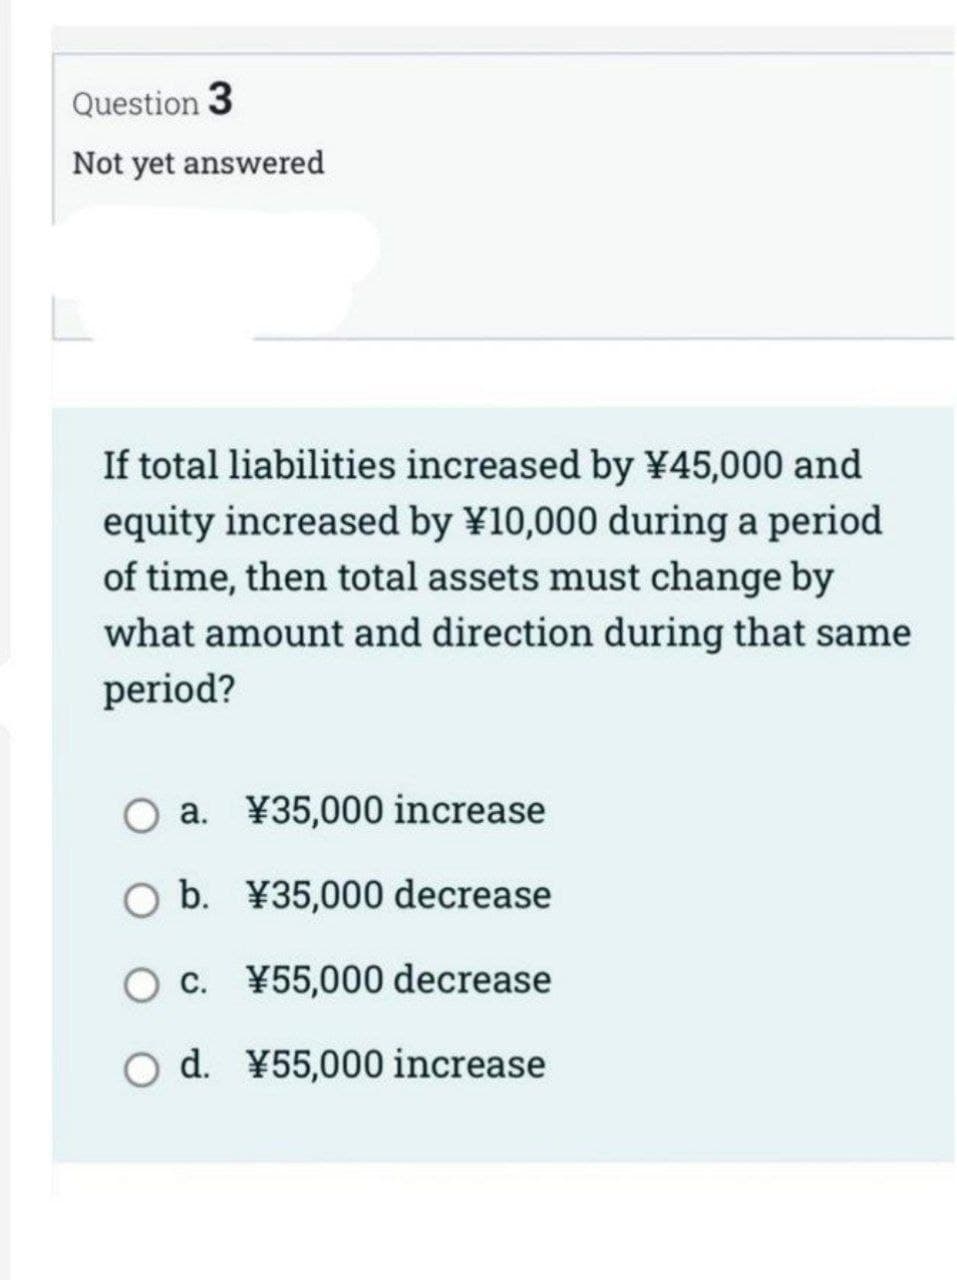 Question 3
Not yet answered
If total liabilities increased by ¥45,000 and
equity increased by ¥10,000 during a period
of time, then total assets must change by
what amount and direction during that same
period?
O a. ¥35,000 increase
O b. ¥35,000 decrease
O c. ¥55,000 decrease
O d. ¥55,000 increase